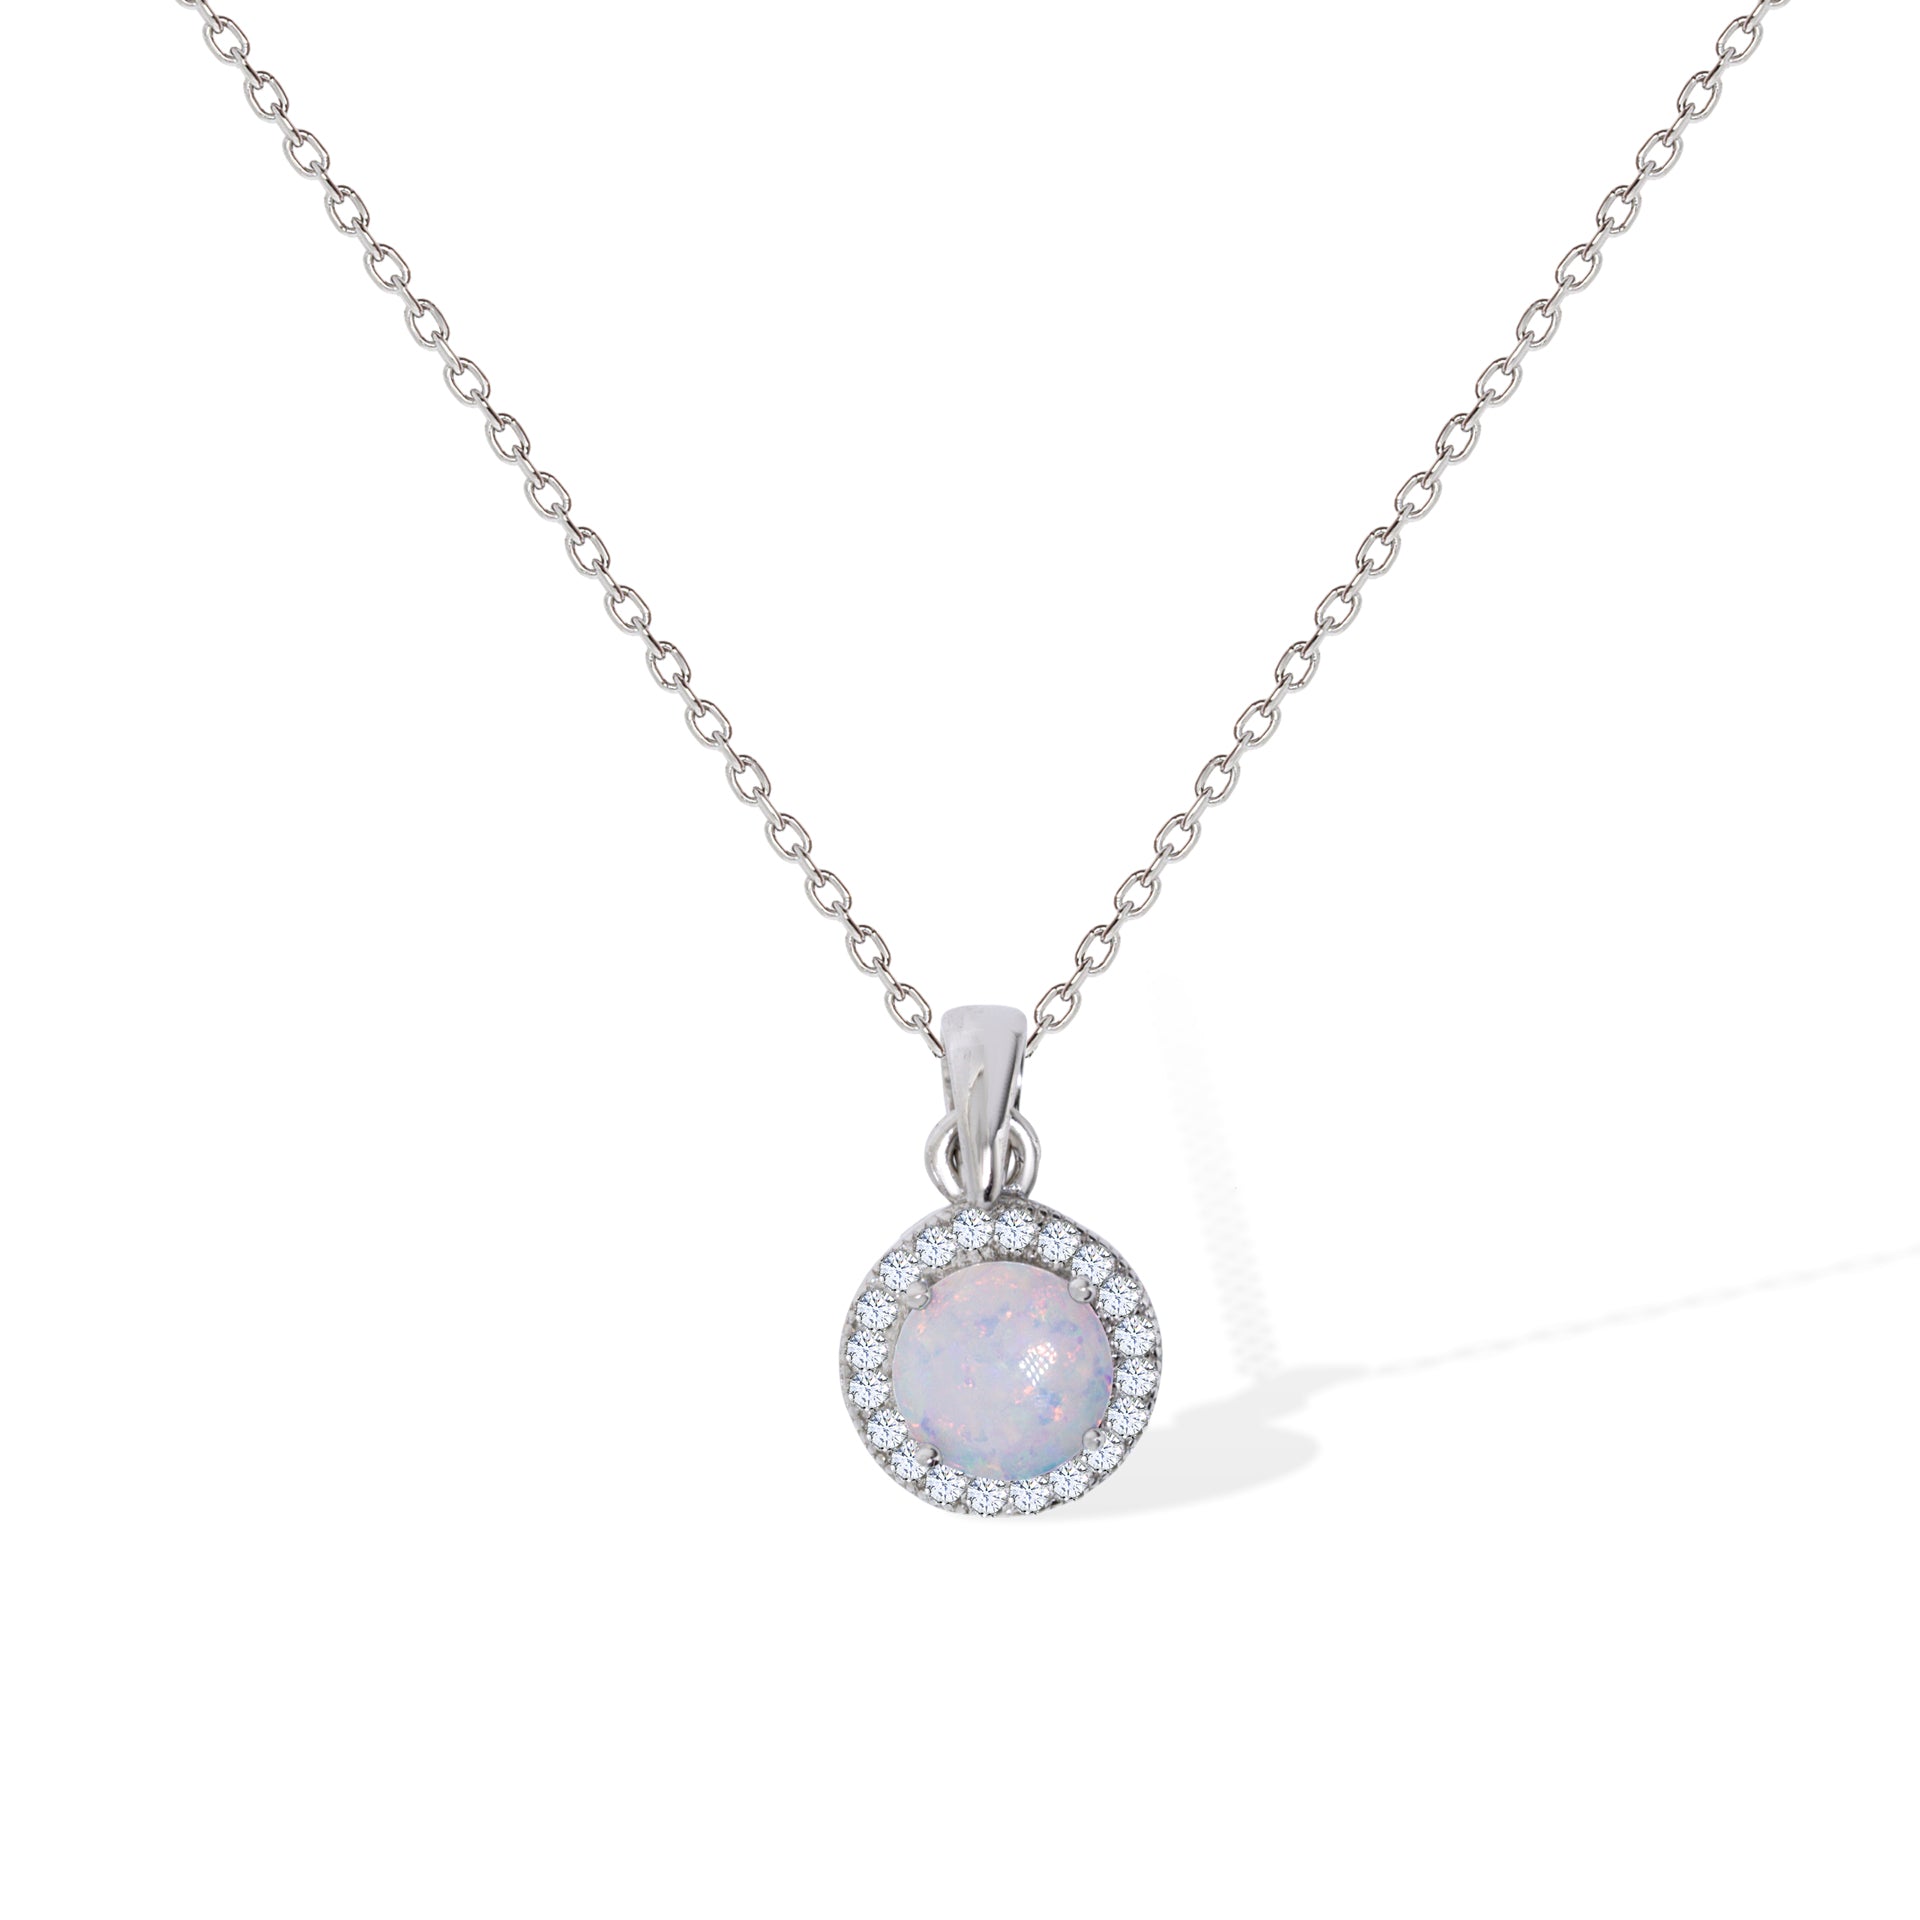 Gemvine Sterling Silver Round Small Opalique Necklace Pendant + 18 Inch Adjustable Chain